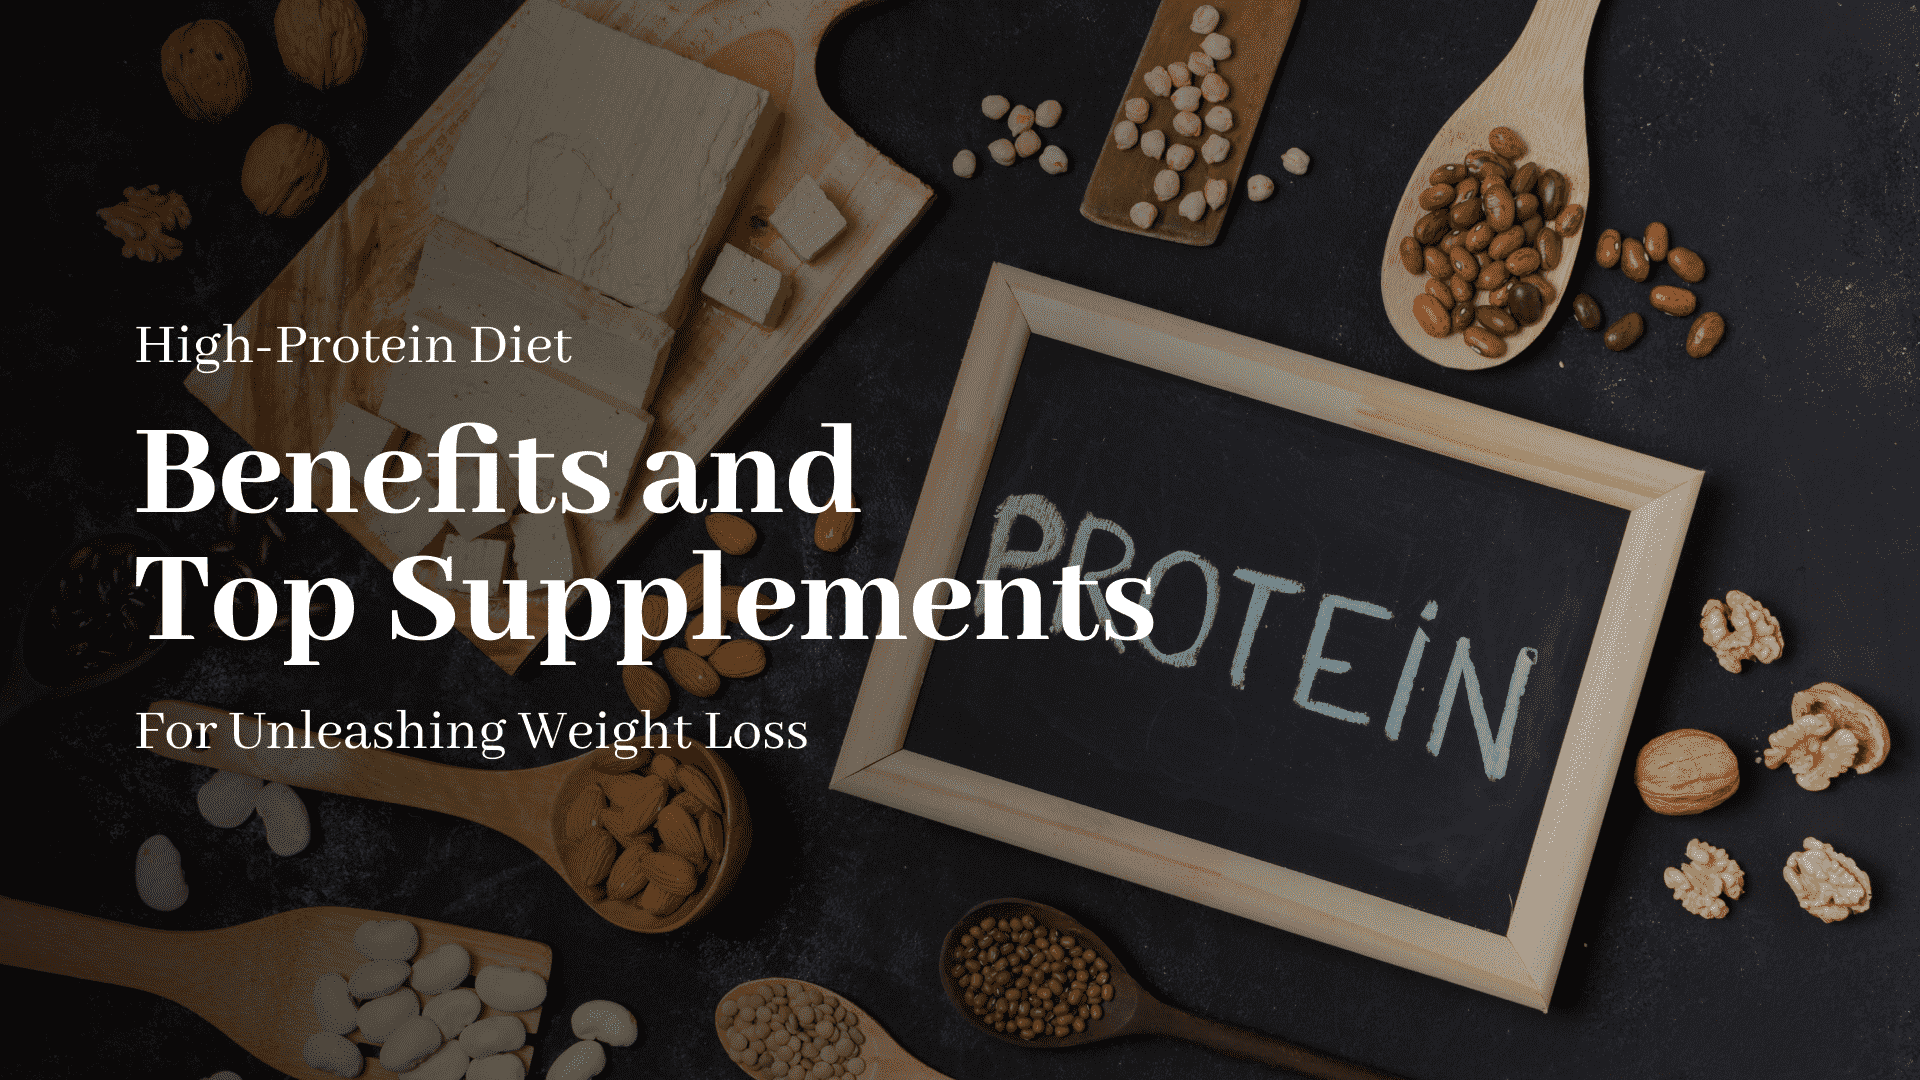 High-Protein Diet Benefits and Top Supplements for Unleashing Weight Loss